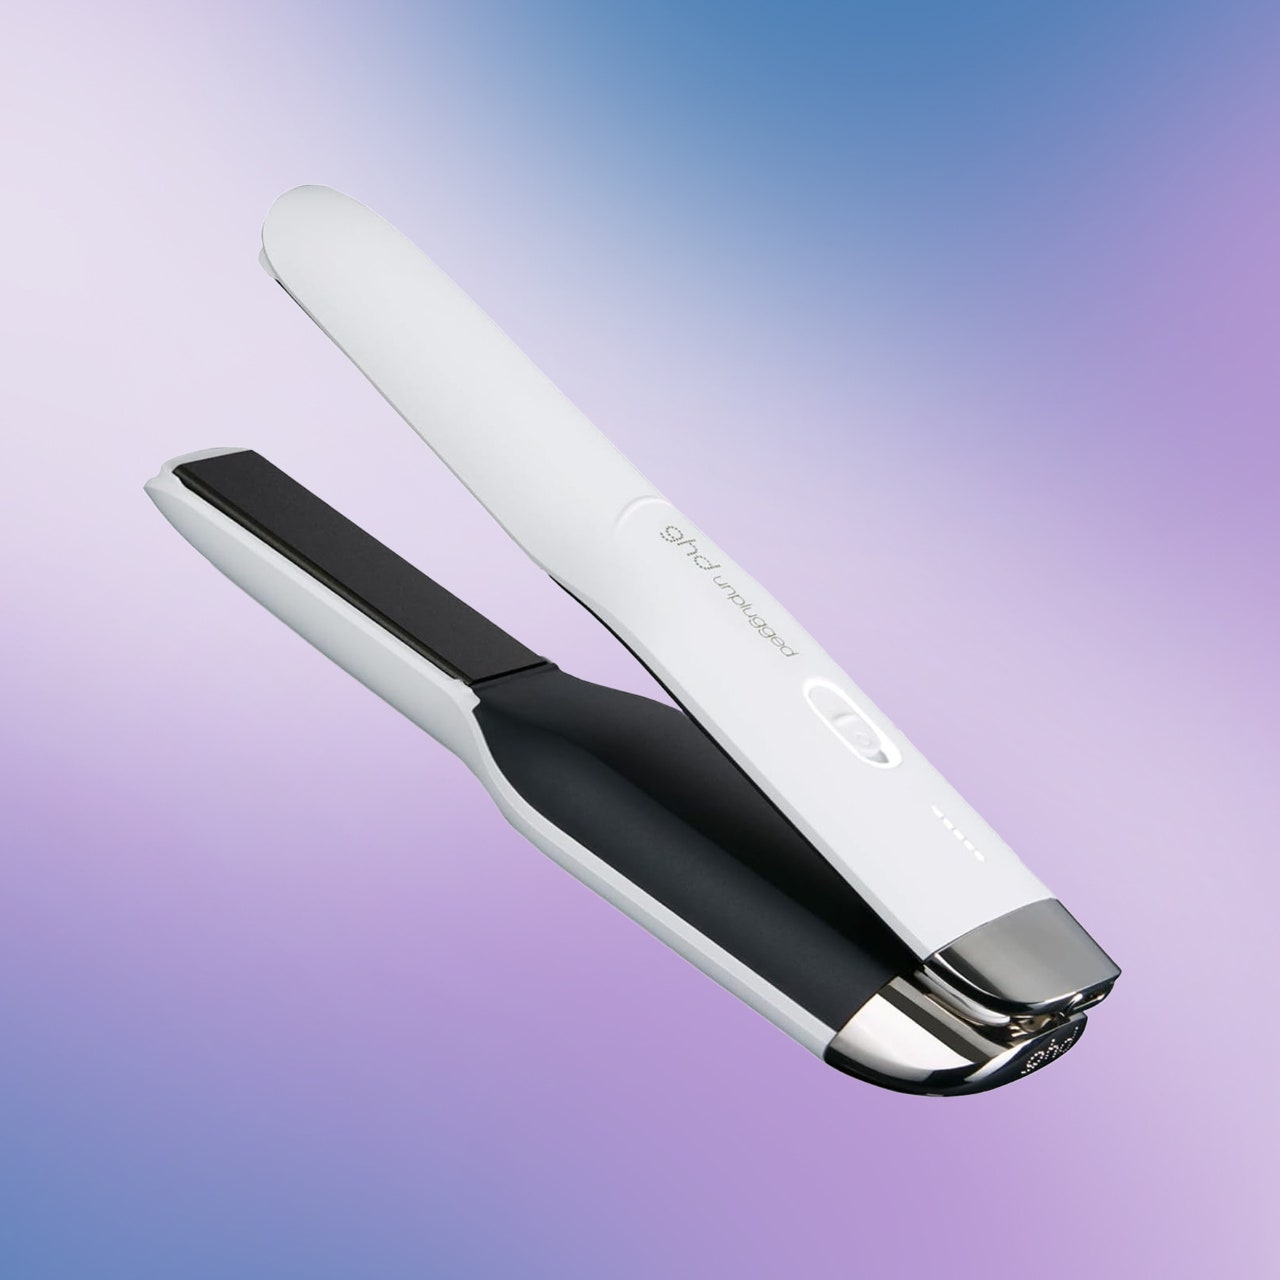 The GHD Unplugged Cordless Styler is the hero hair tool worth looking out for this Prime Day